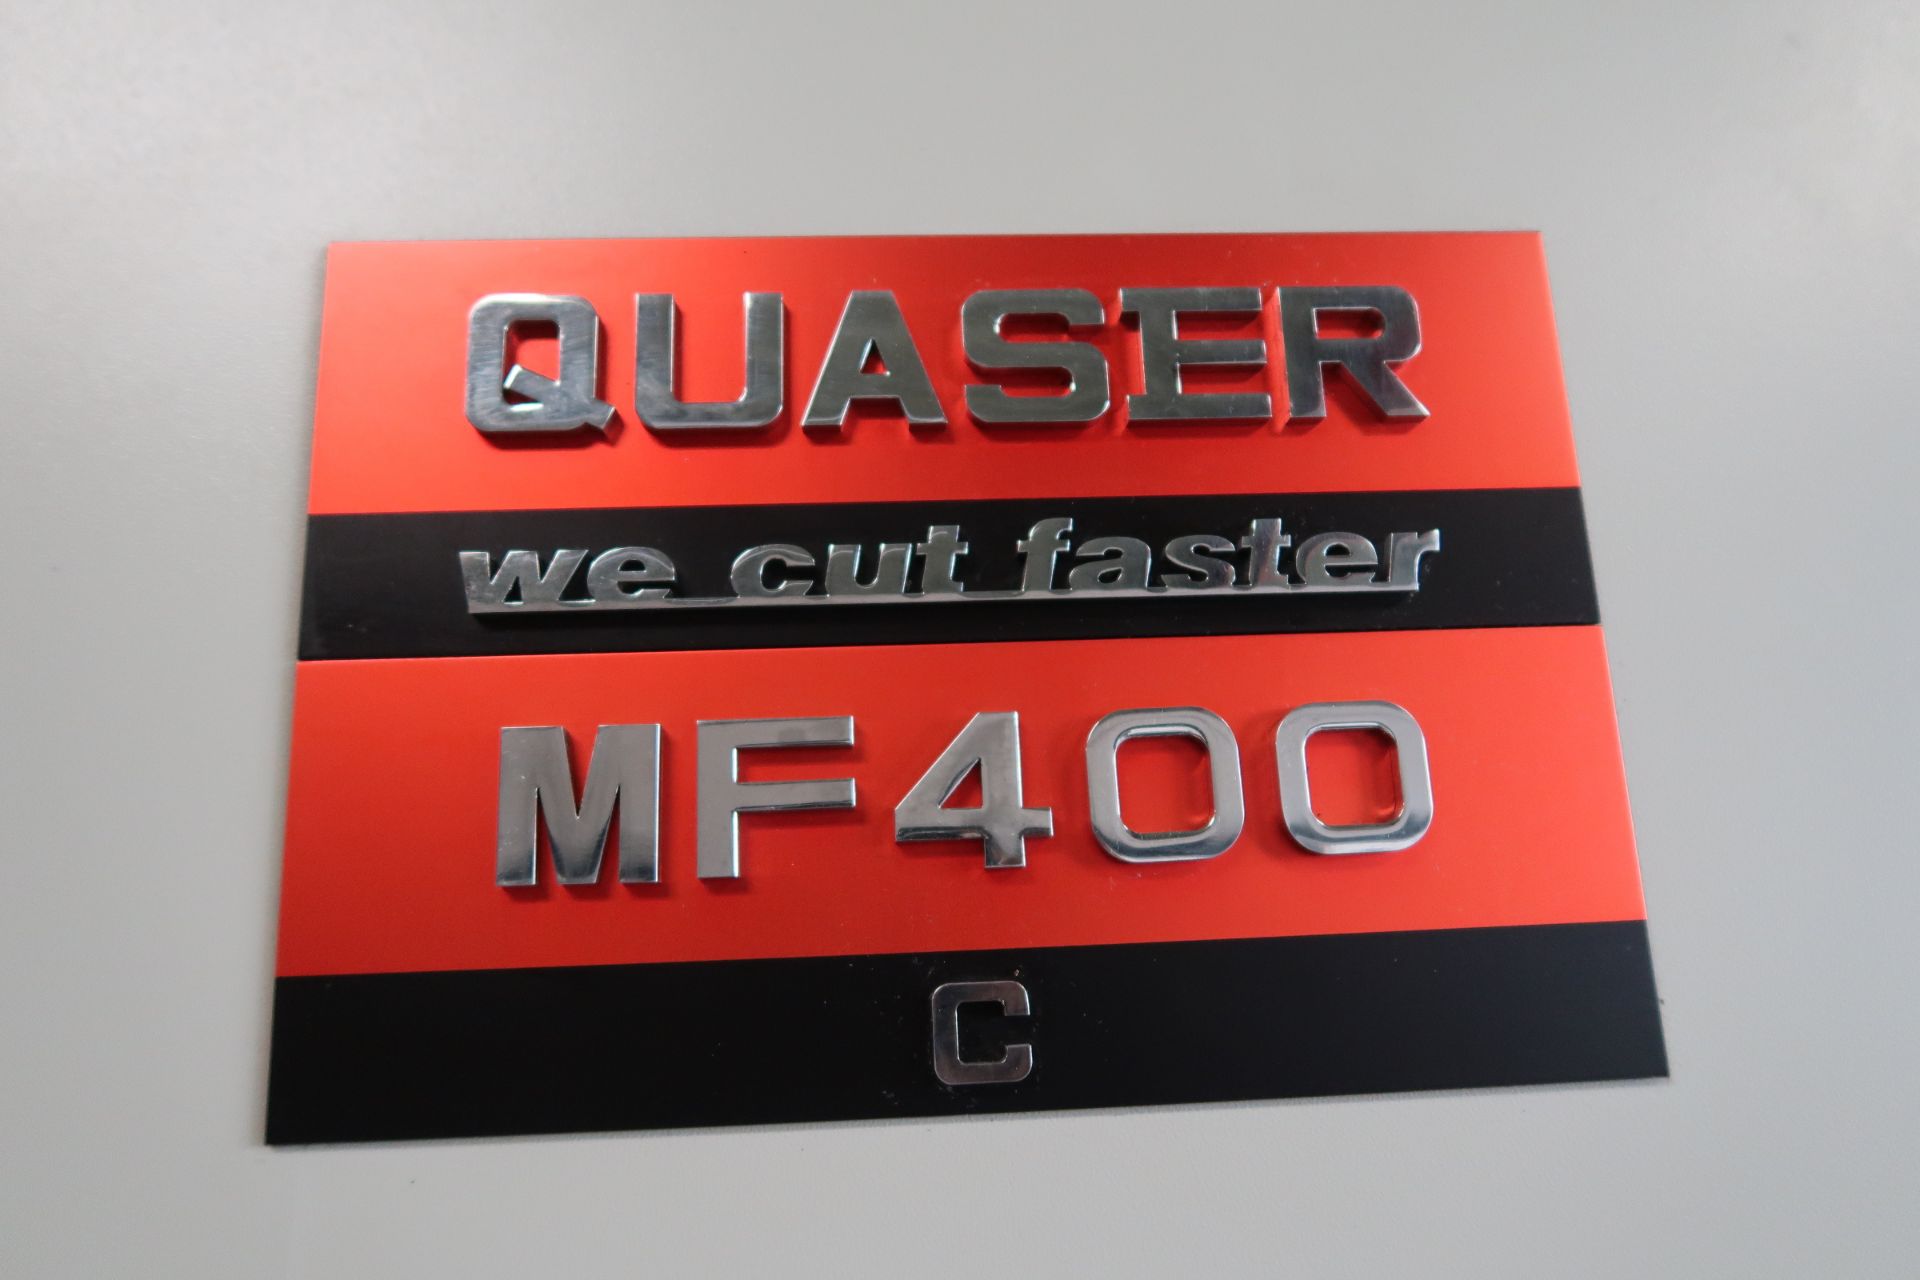 2011 Quaser MF400C/10C 5-Axis CNC Machining Center s/n 306B110041 w/ Fanuc Series 0i-MD, SOLD AS IS - Image 15 of 16